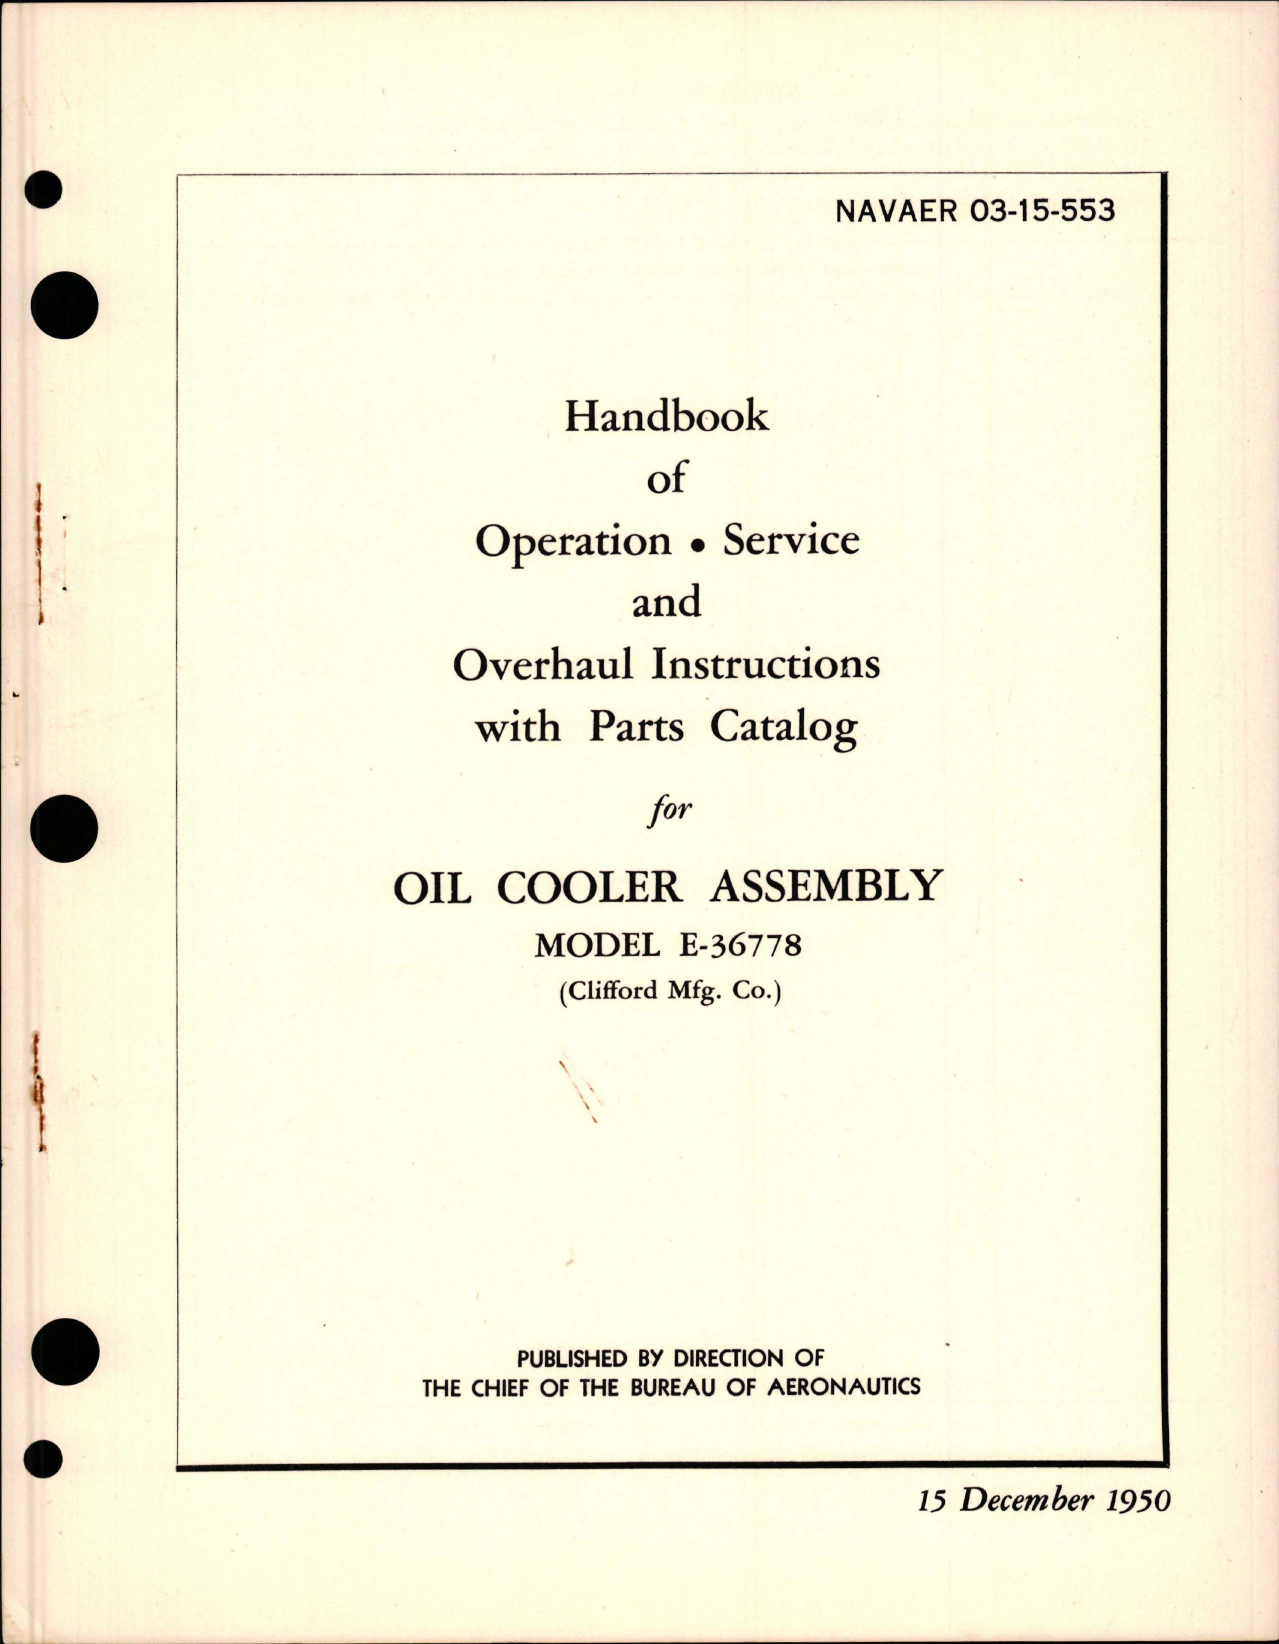 Sample page 1 from AirCorps Library document: Operation, Service, Overhaul Instructions with Parts Catalog for Oil Cooler Assembly - Model E-36778